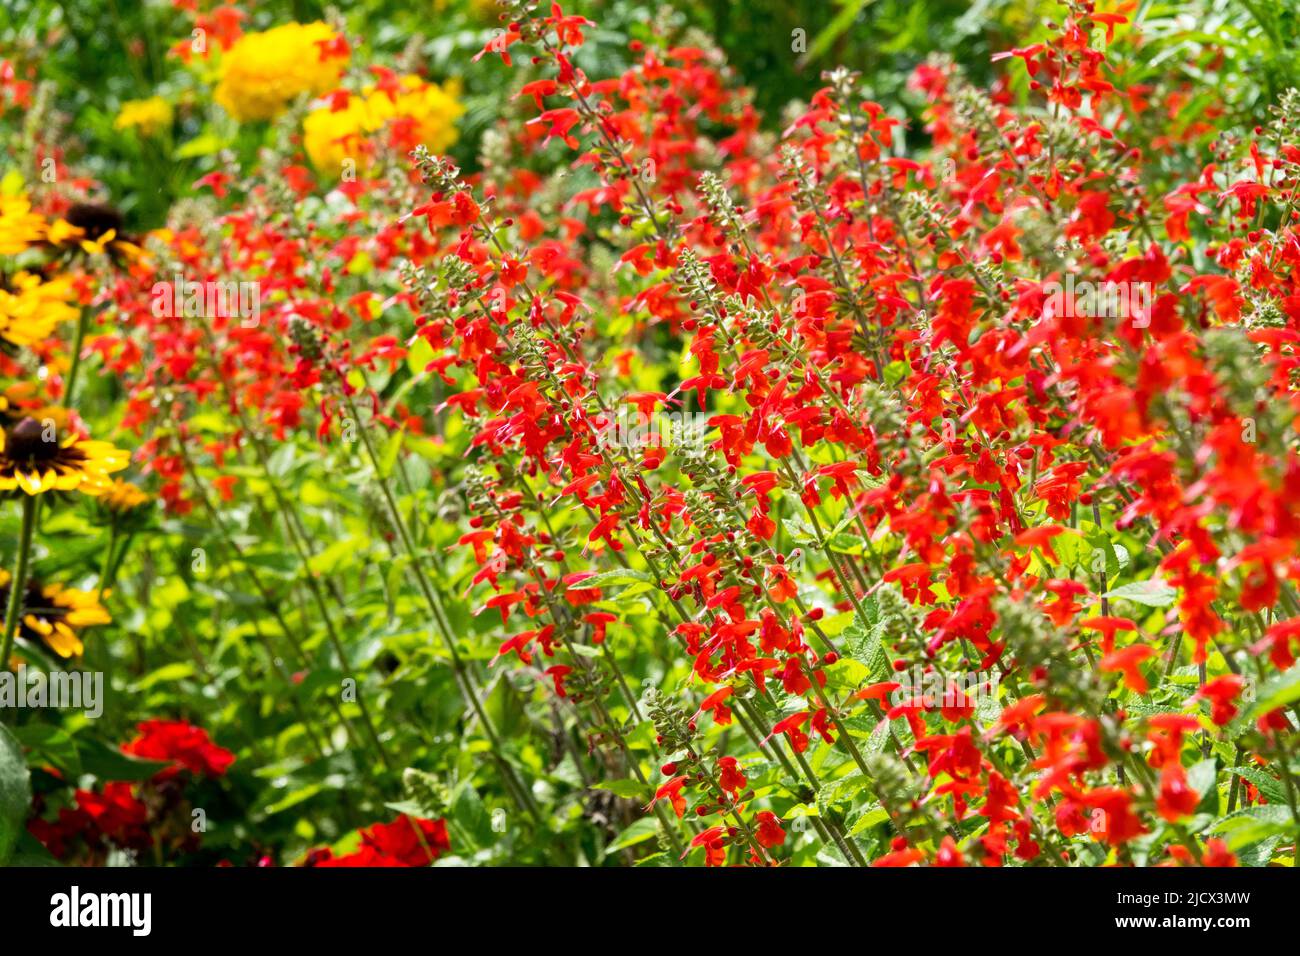 Colourful Summer, August, Flower bed, Salvias, Red, Salvia coccinea 'Lady in Red' Stock Photo